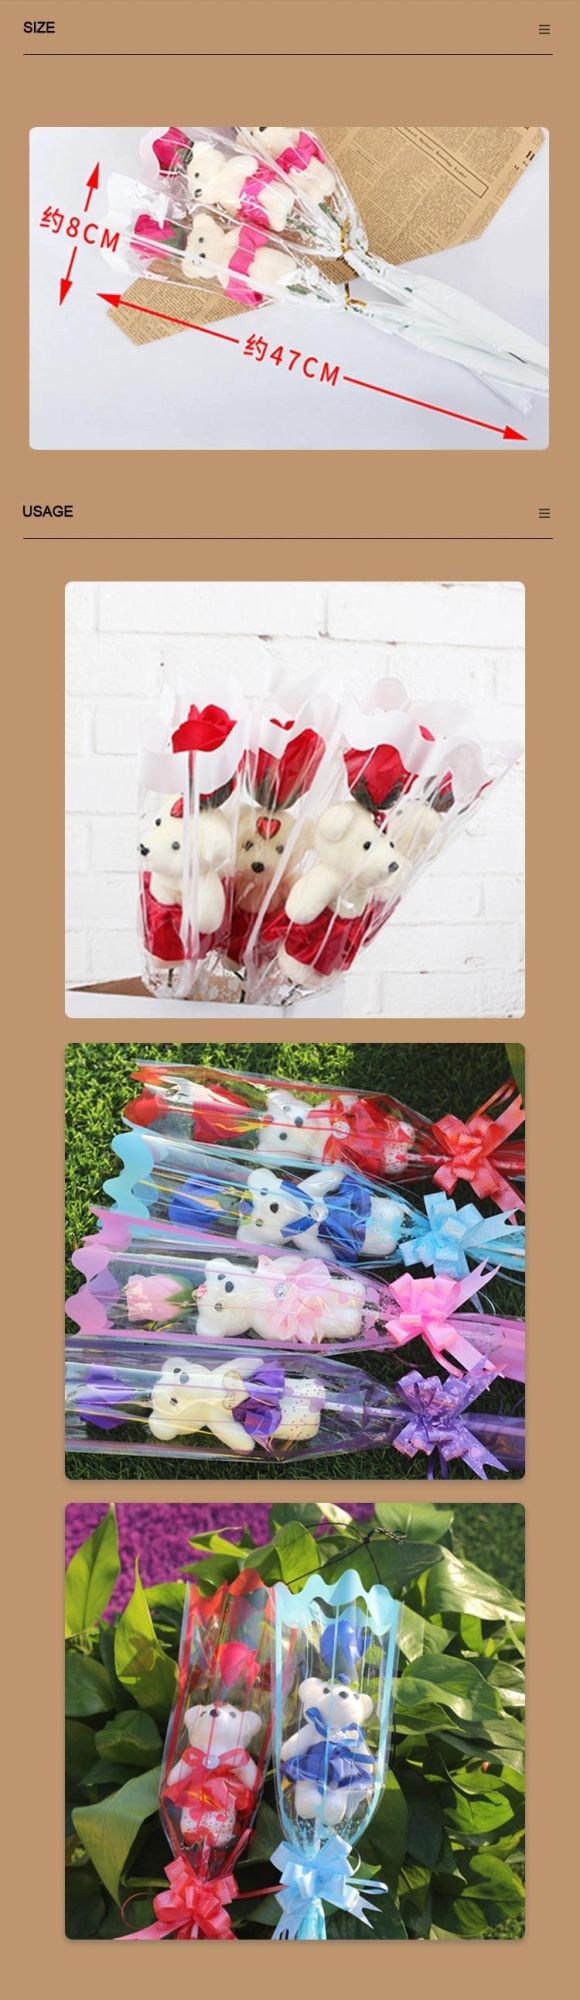 Flower Soap Roses Bouquet with Teddy Bear for Christmas, Valentine′s Day, Mother′s Day Gifts